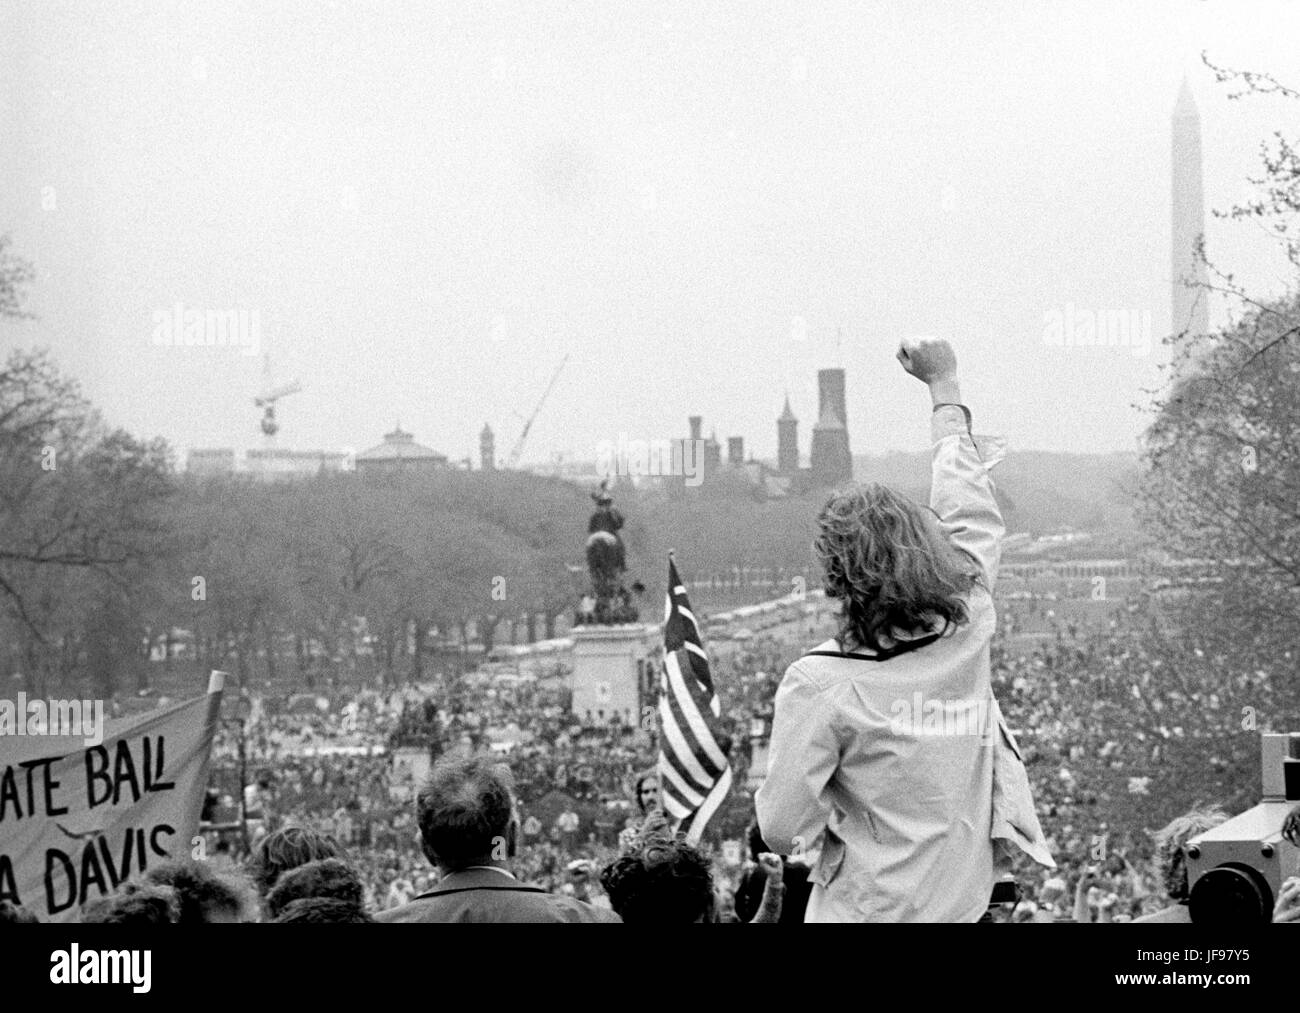 A demonstrator raises a clenched fist toward antiwar protestors on the U.S. Capitol grounds and the Mall during massive demonstrations against the Vietnam war on April 23, 1971 as Lt. John Kerry prepares to speak. Stock Photo